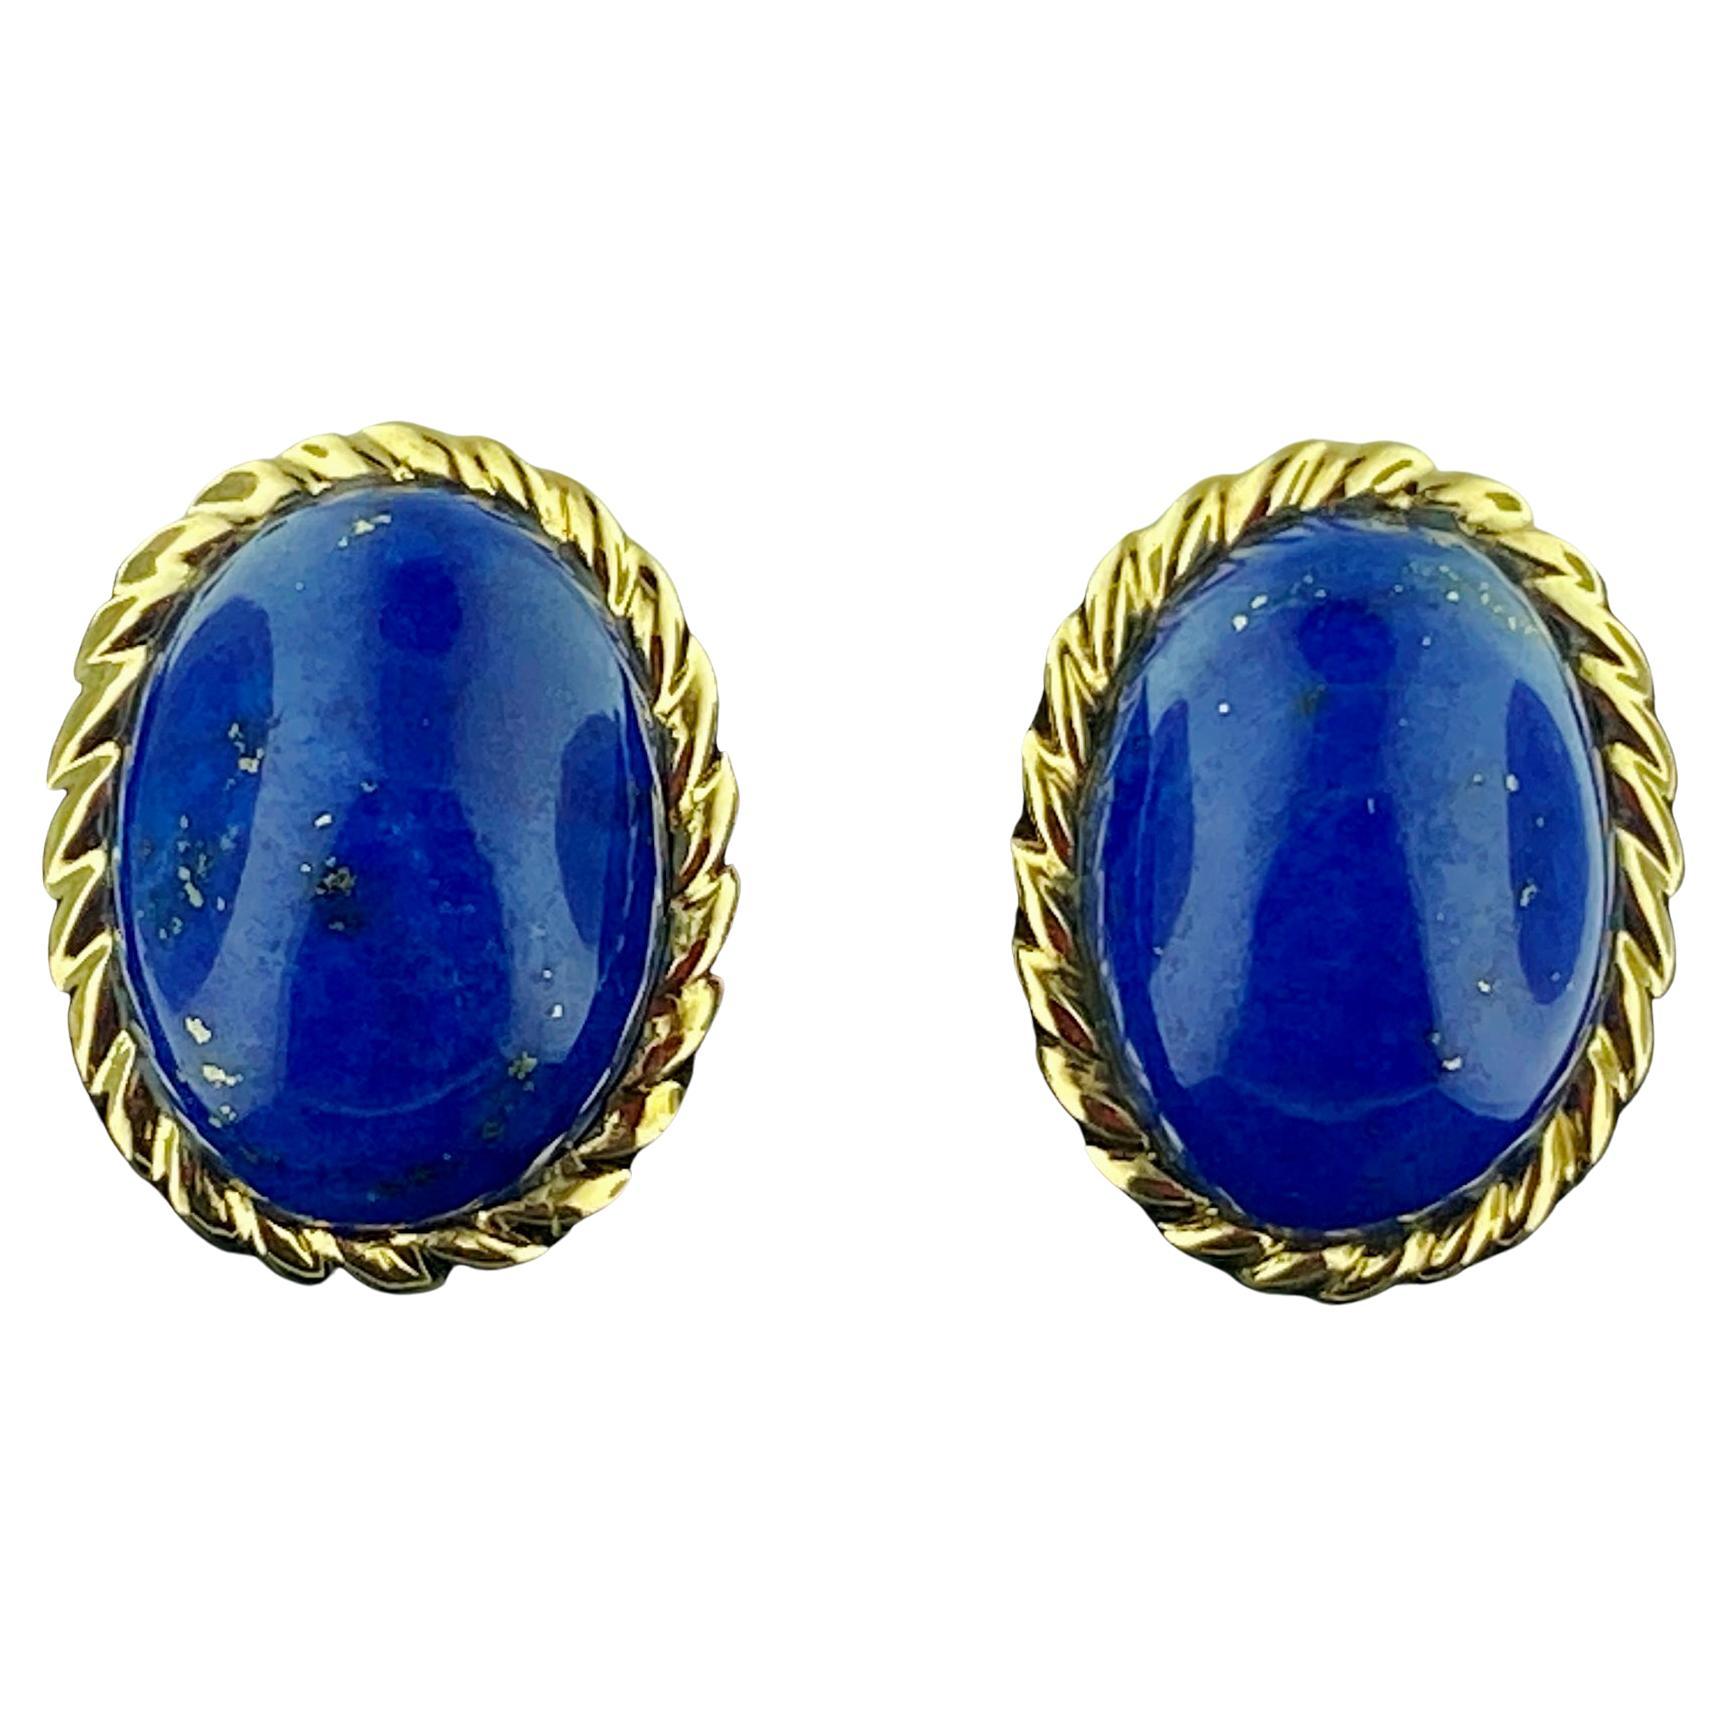 14KT Yellow Gold Oval Cabochon Lapis Lazuli Earrings